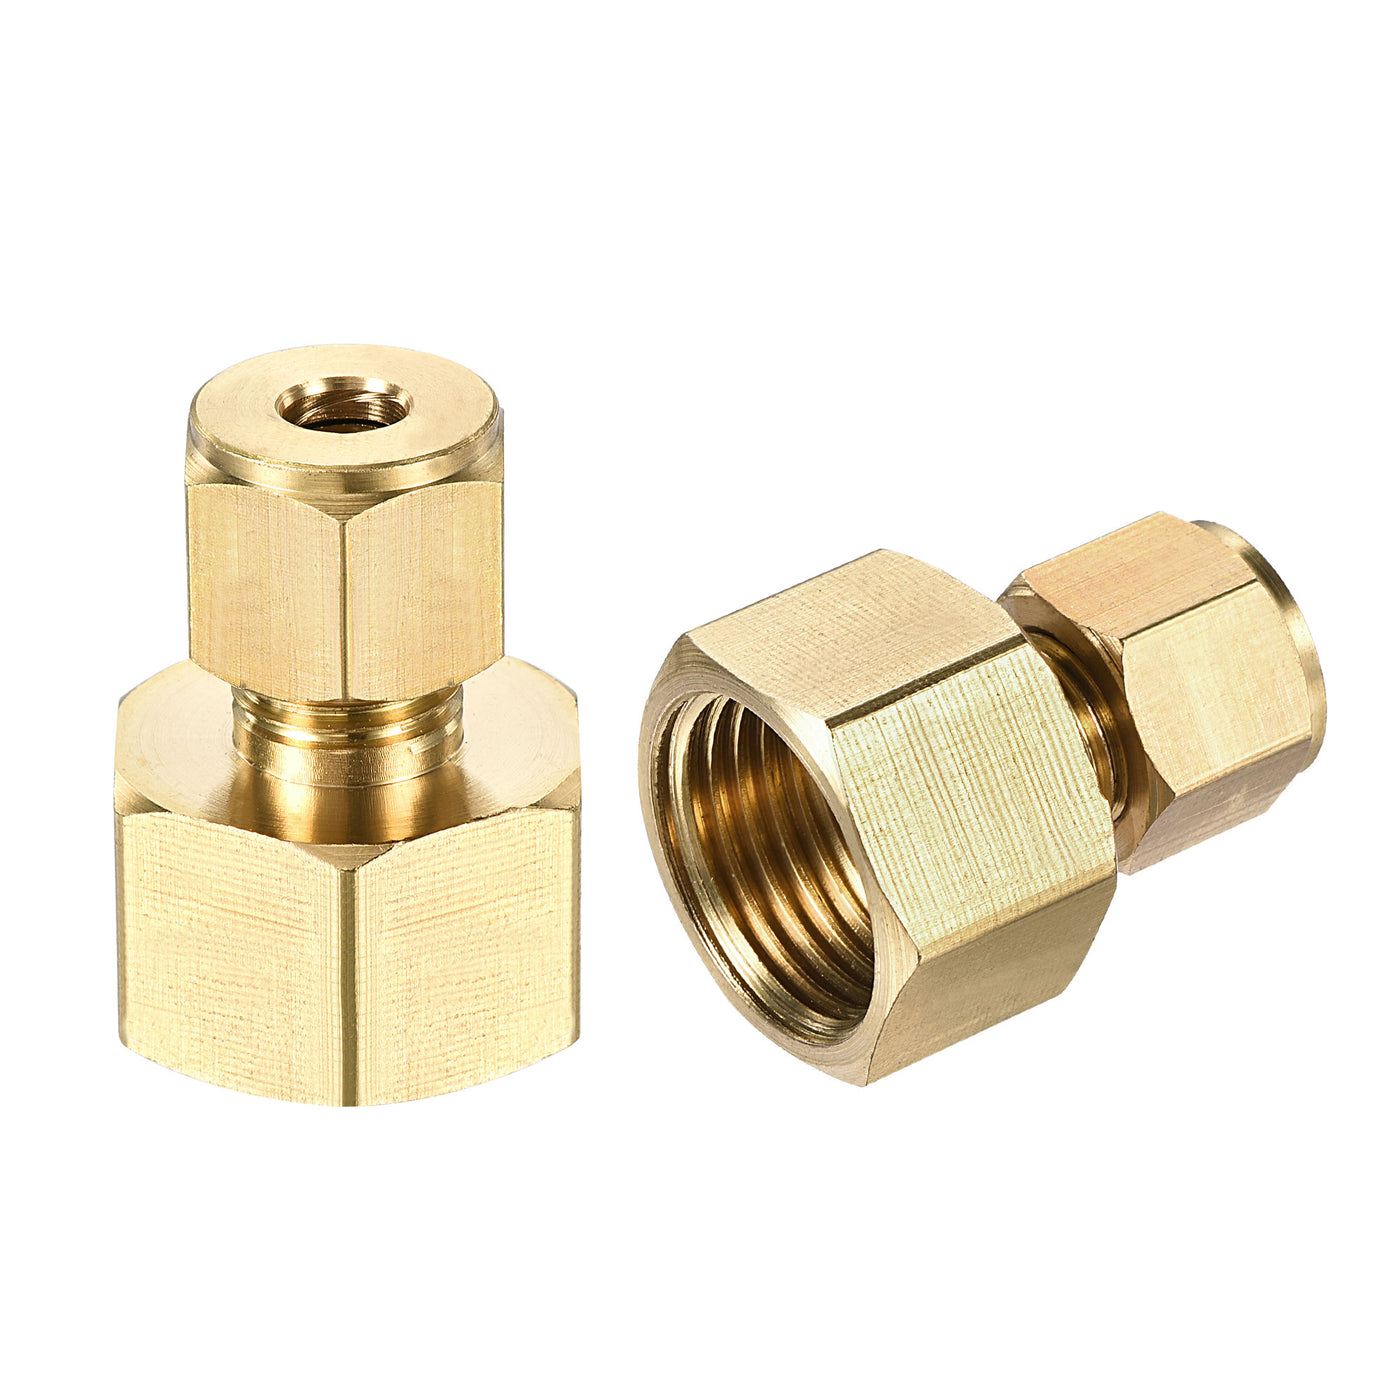 Uxcell Uxcell Compression Tube Fitting G1/2 Female Thread x 10mm Tube OD Straight Coupling Adapter Brass, 2pcs